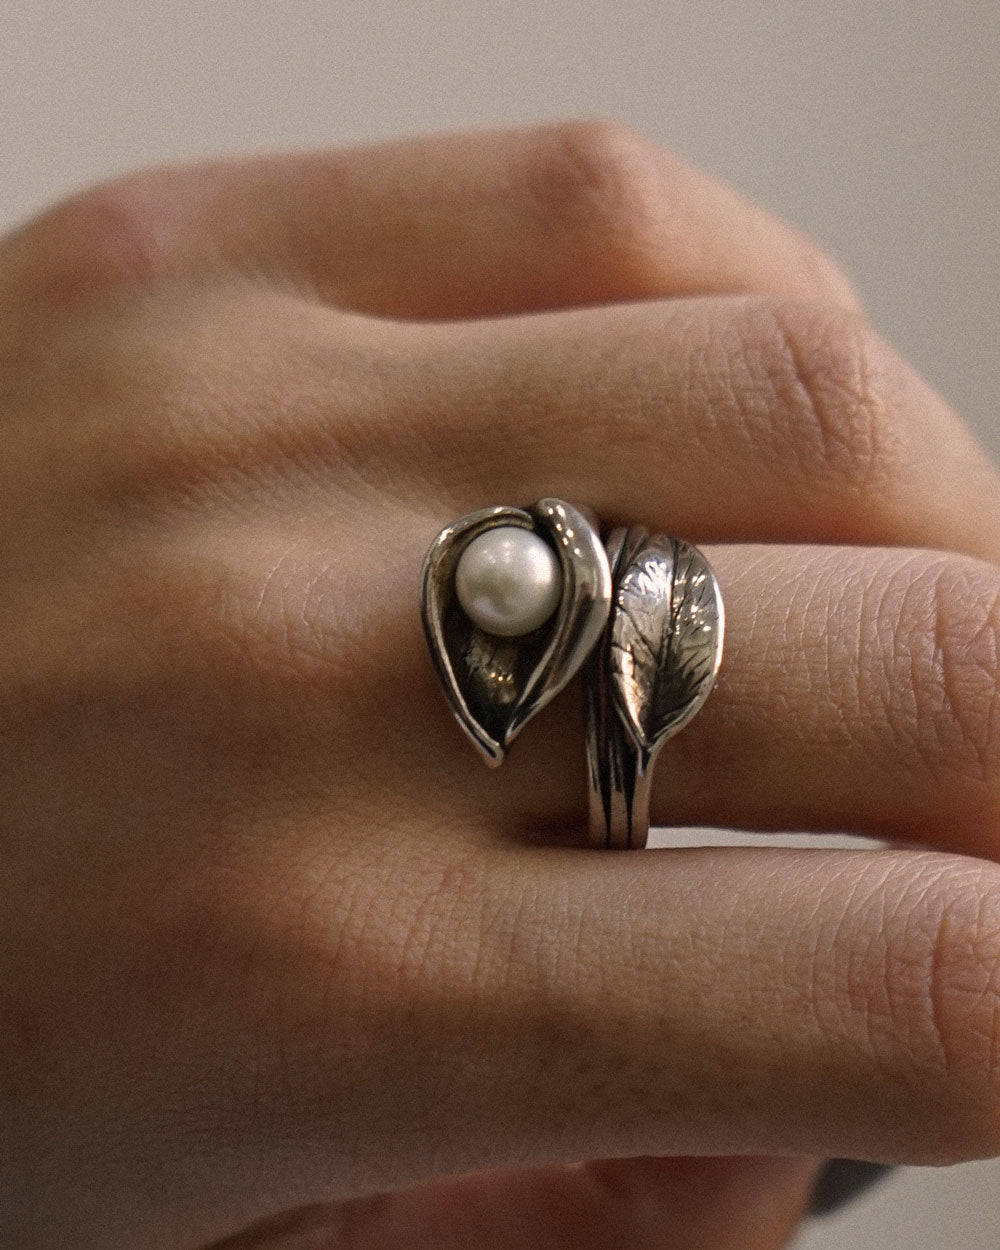 Silver Ring w/ Pearl / size: 7